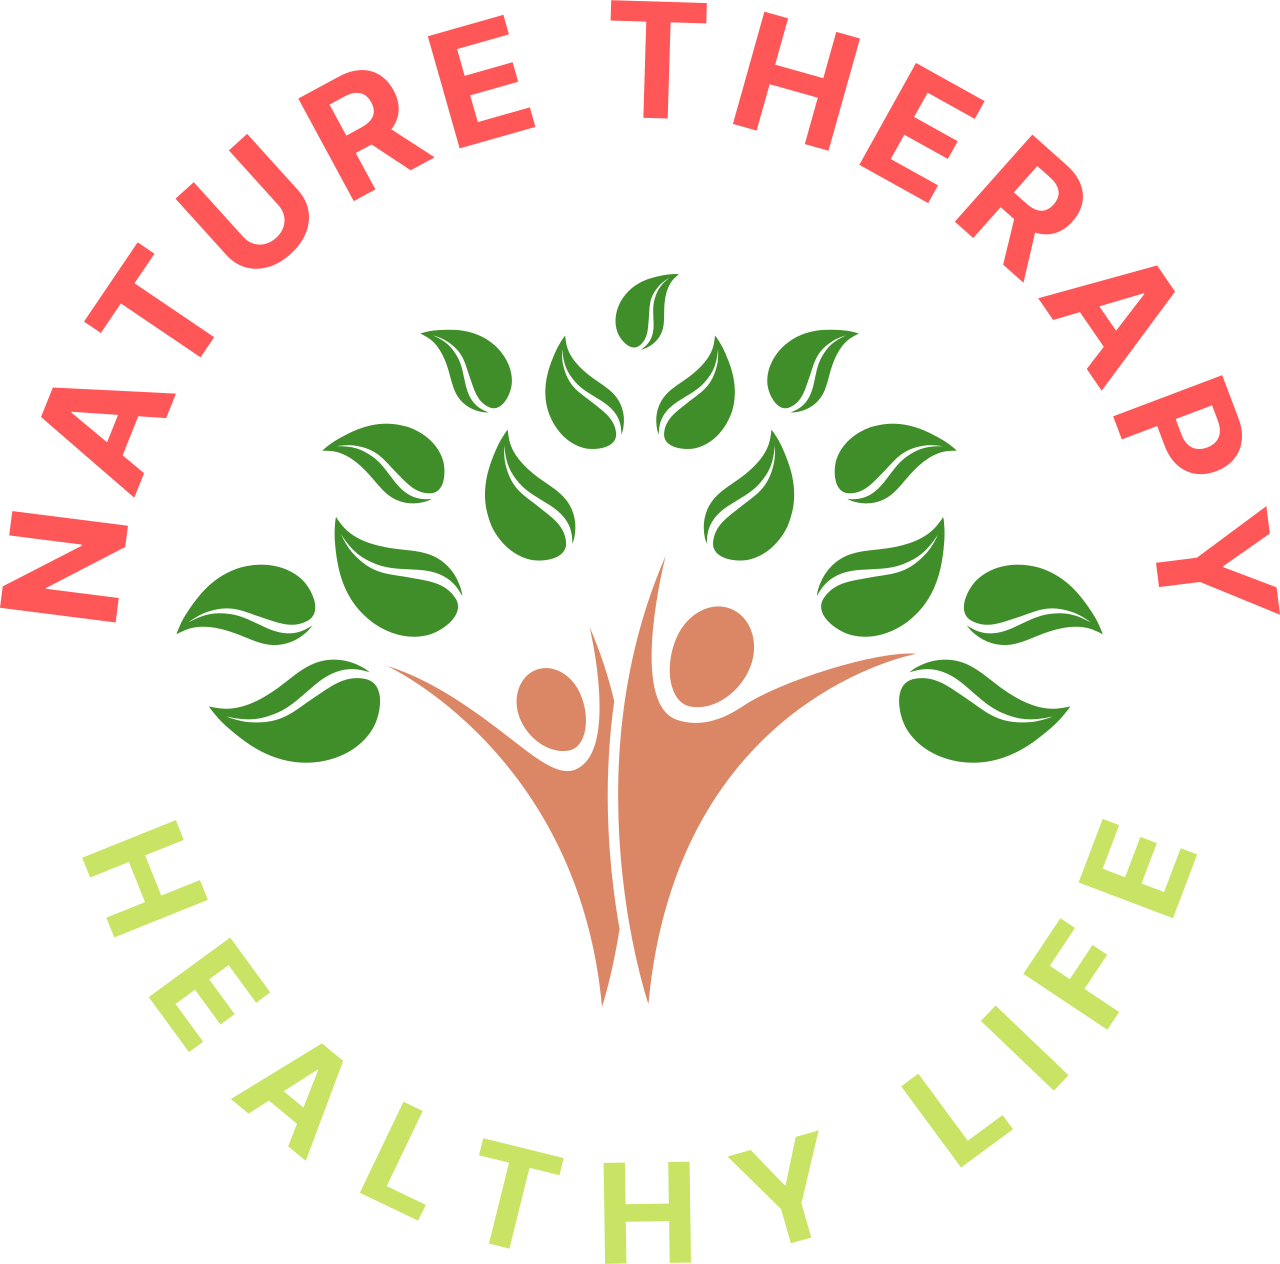 NATURE THERAPY's web page